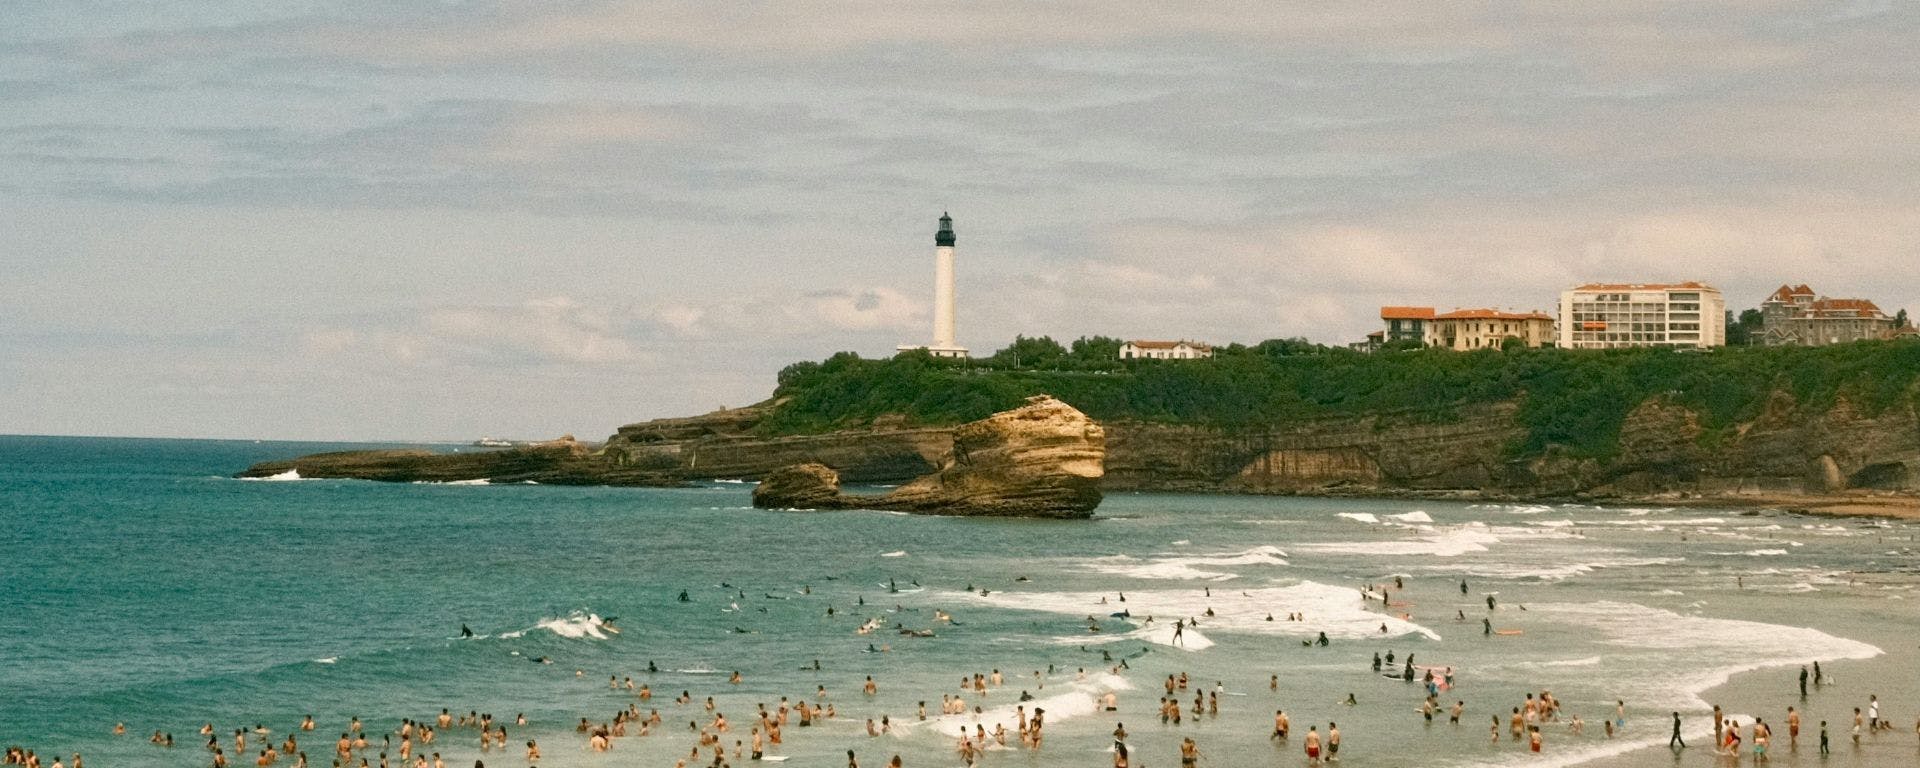 Coworking, Coliving and Surfing in Biarritz (France)